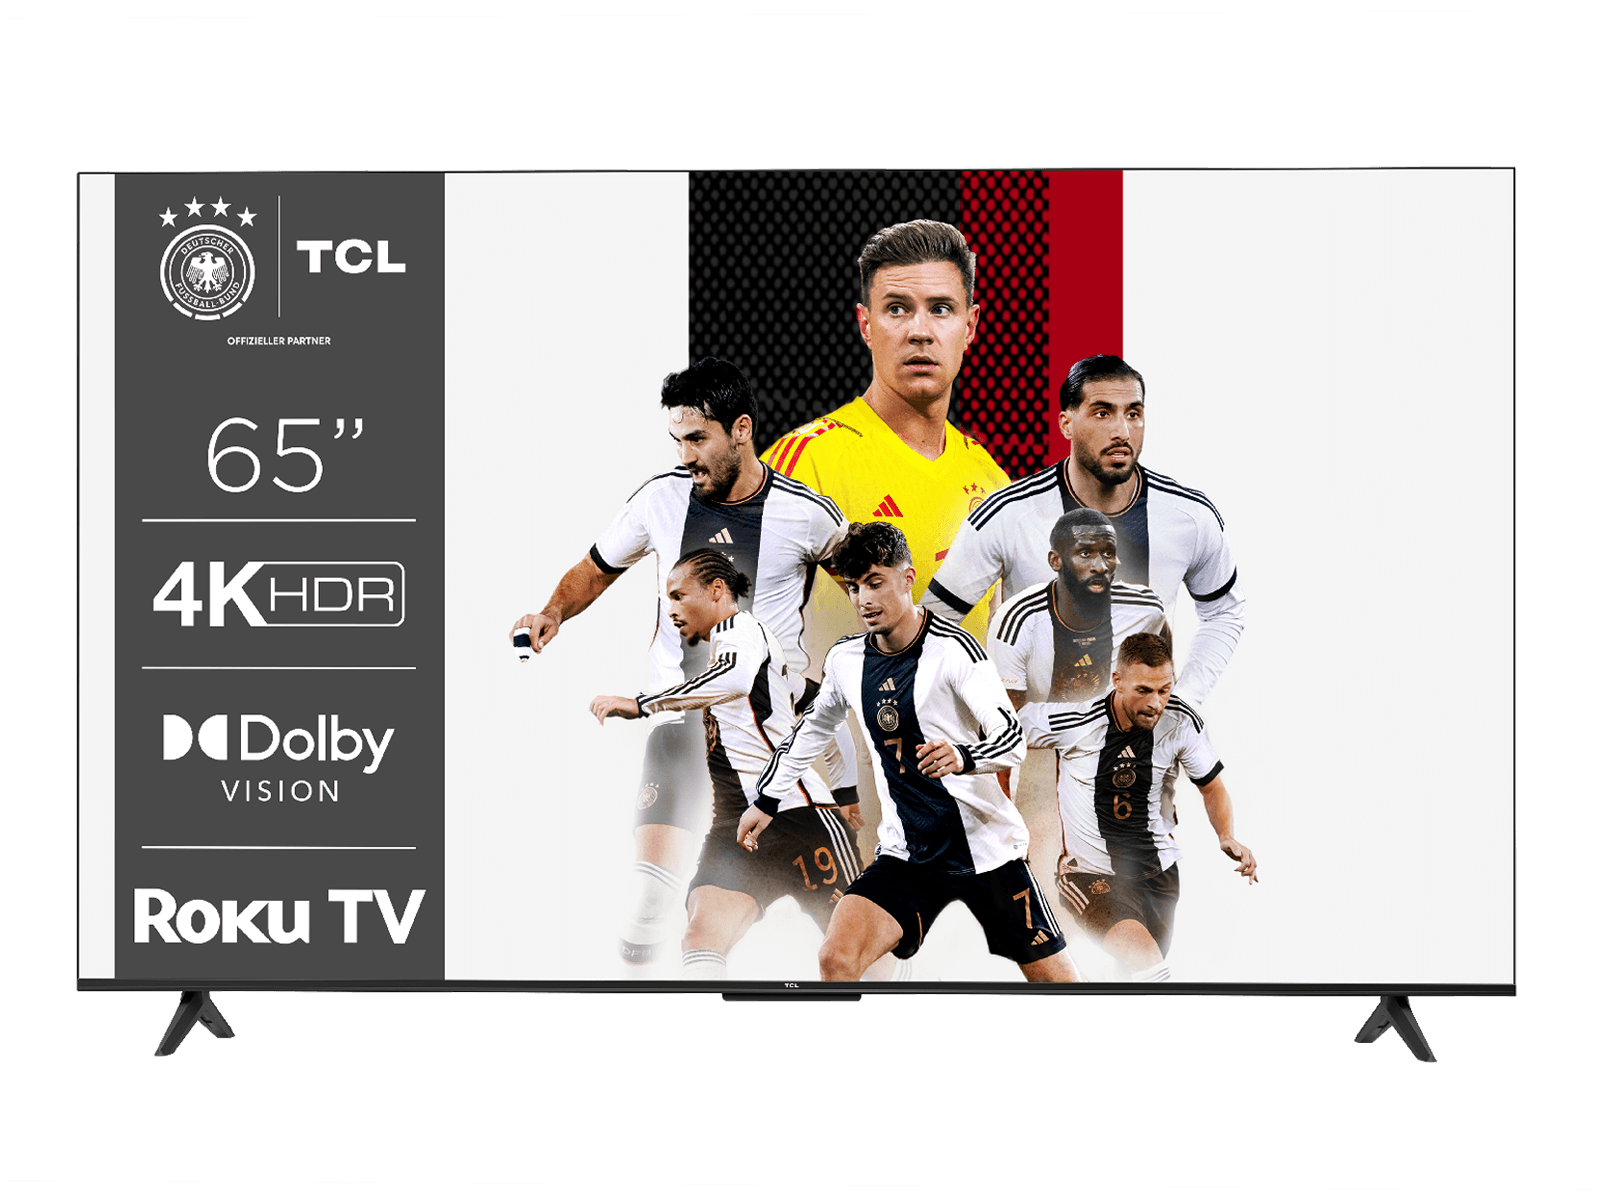 TCL LED-Fernseher (164 cm/65 Zoll, HDR10, Dolby HDR, Master, HD, Game TV, Vision, Smart-TV, Roku 4K Ultra HDMI